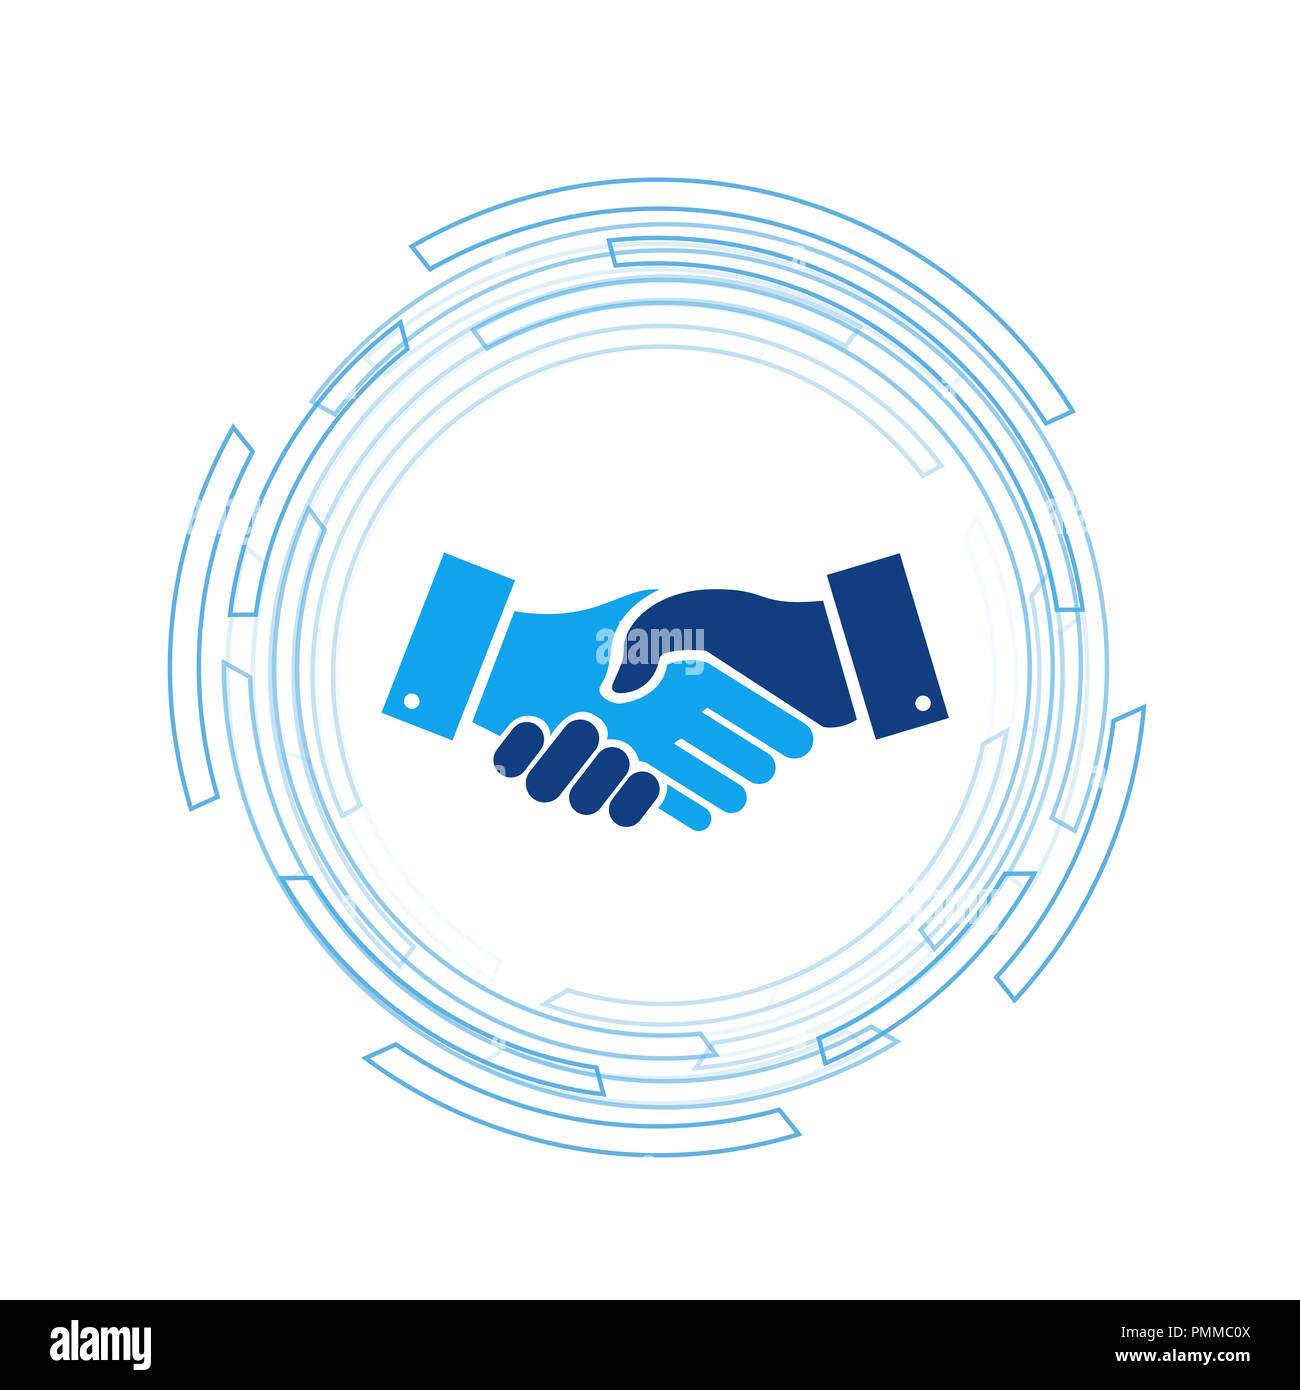 business handshake over a tech turning circle . vector illustration design over white background. Stock Photo